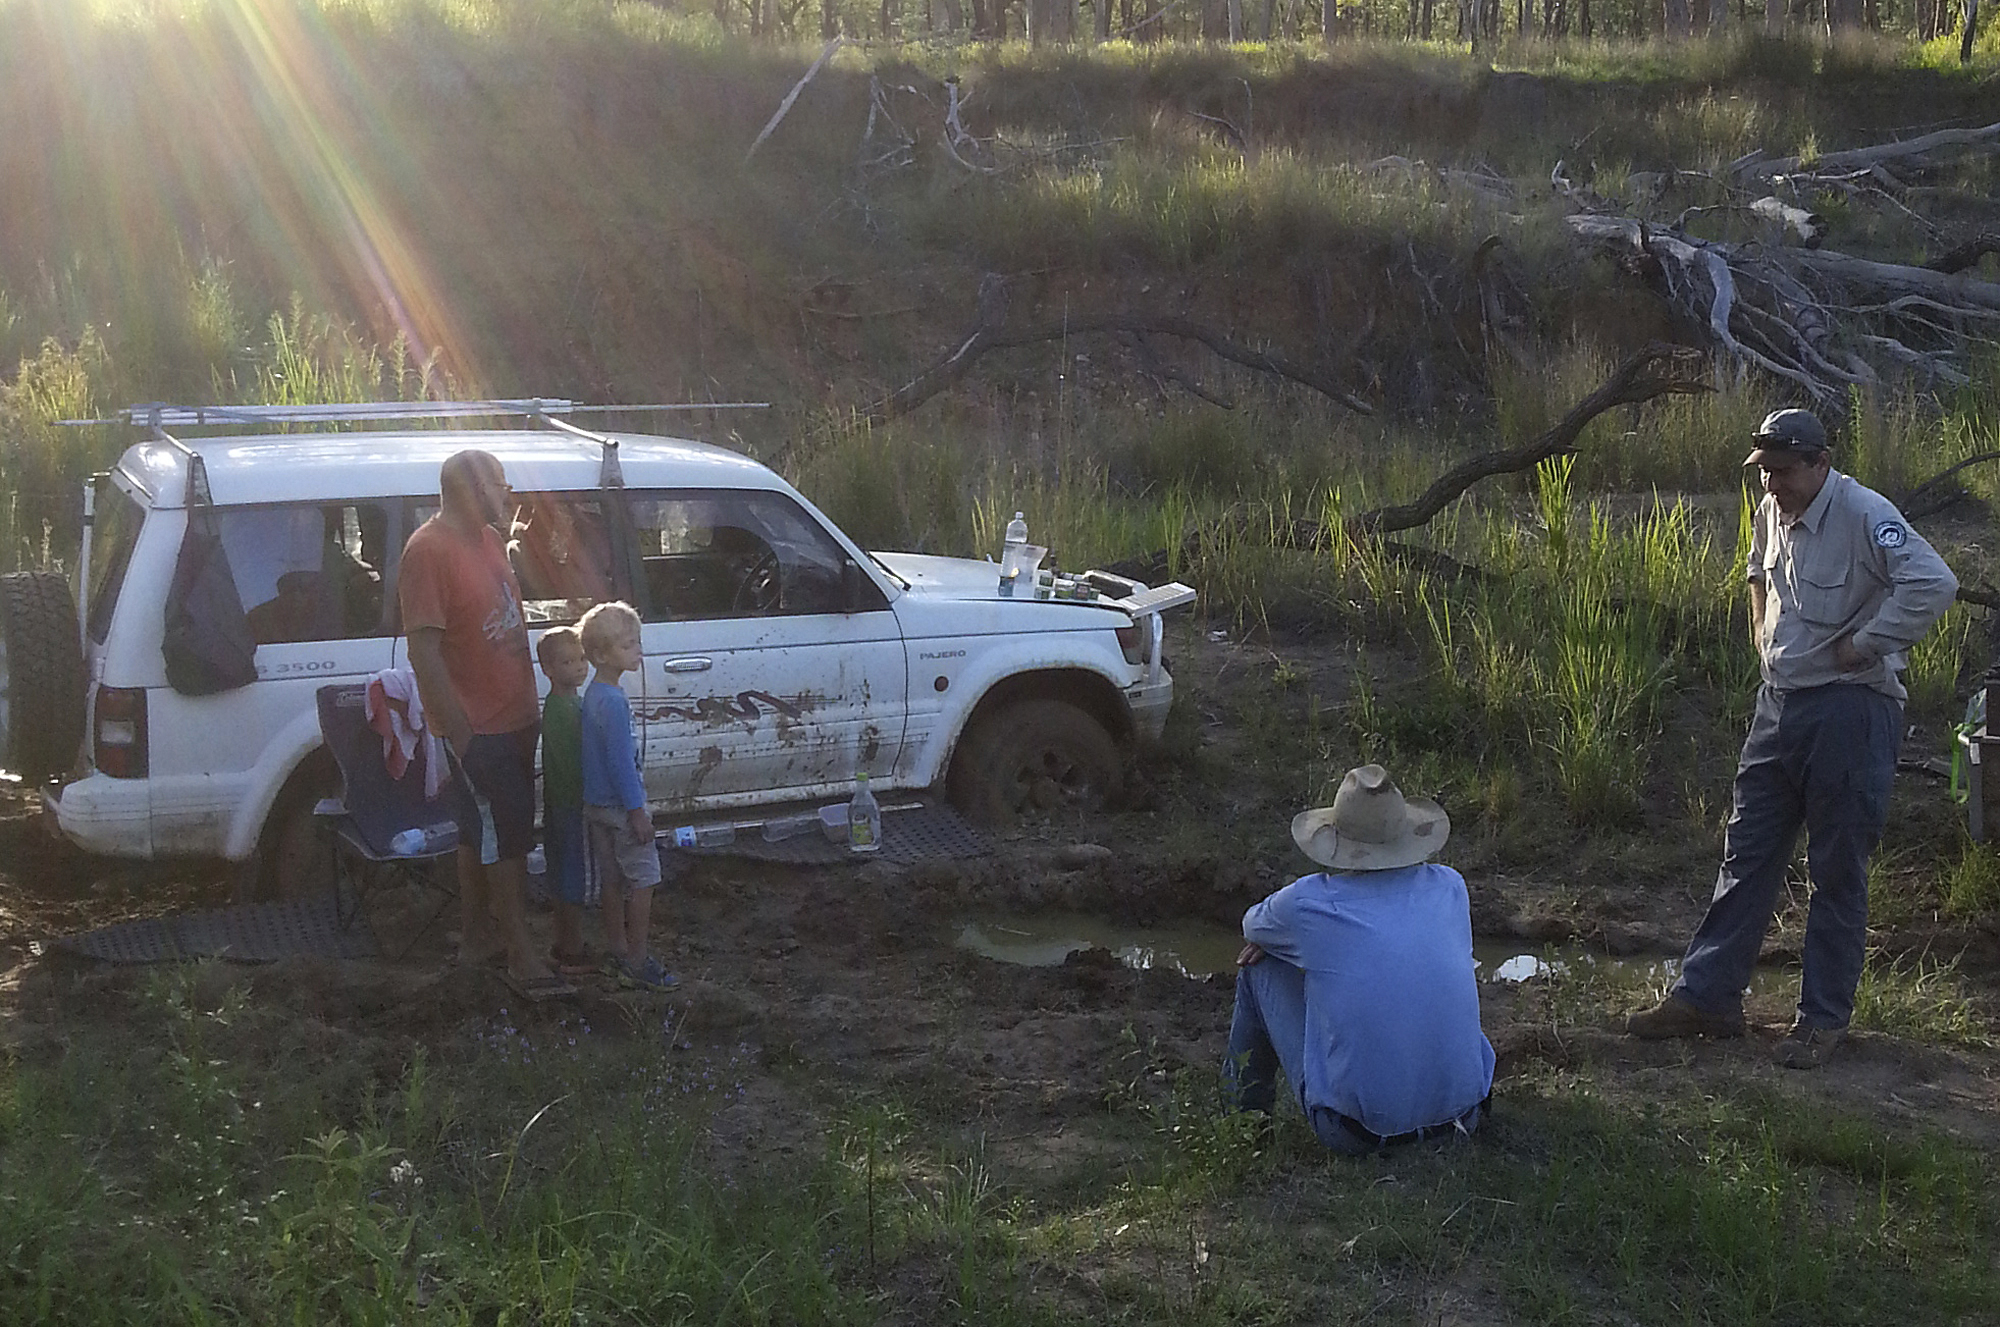 In this Dec 22, 2014 photo provided by Queensland Police, Steven Van Lonkhuyzen, left, with his sons Timothy, 5, second left, and Ethan, 7, third left, speaks to farmer Tom Wagner, center, and a park ranger in the remote Expedition National Park, northwest of Brisbane in Australia. (APAP)